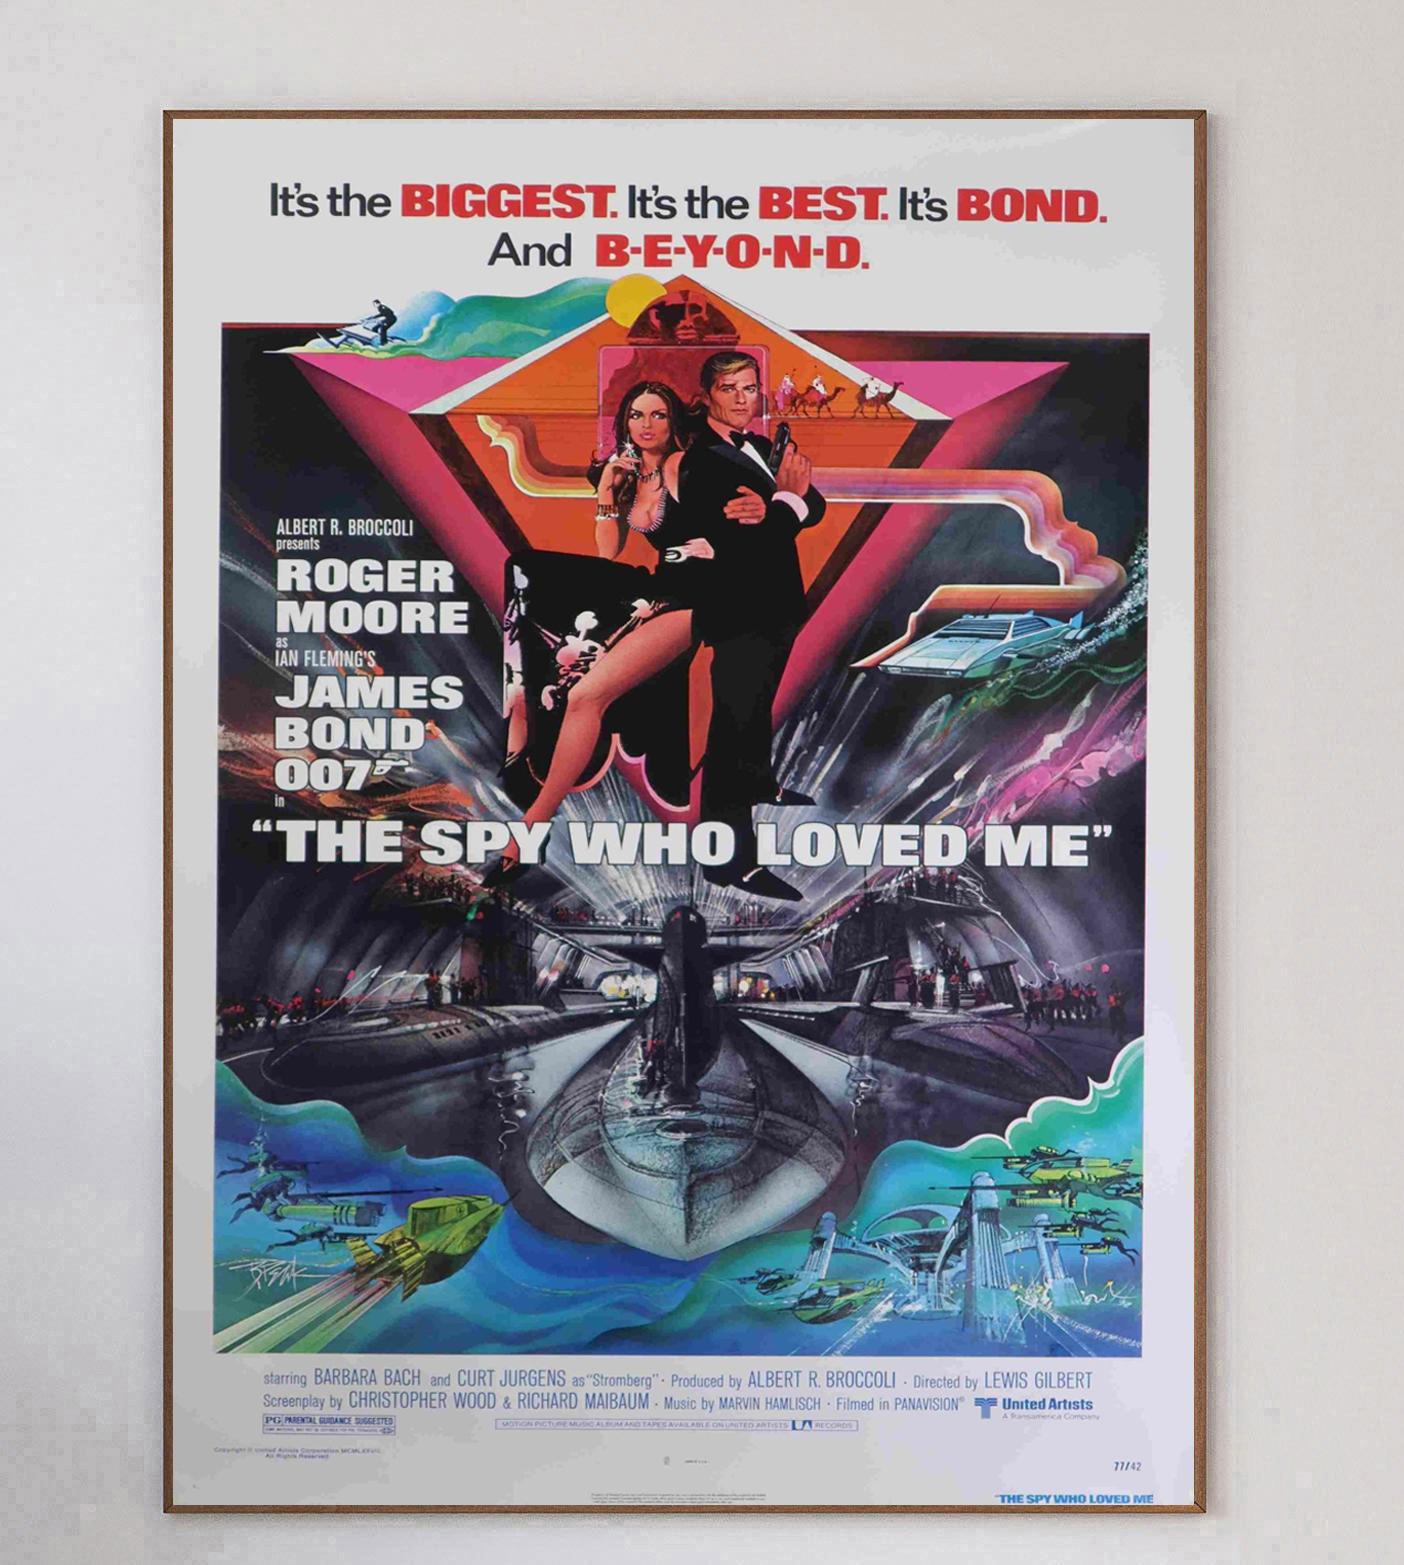 The 10th film in the Eon James Bond film series and the third outing for Roger Moore, 